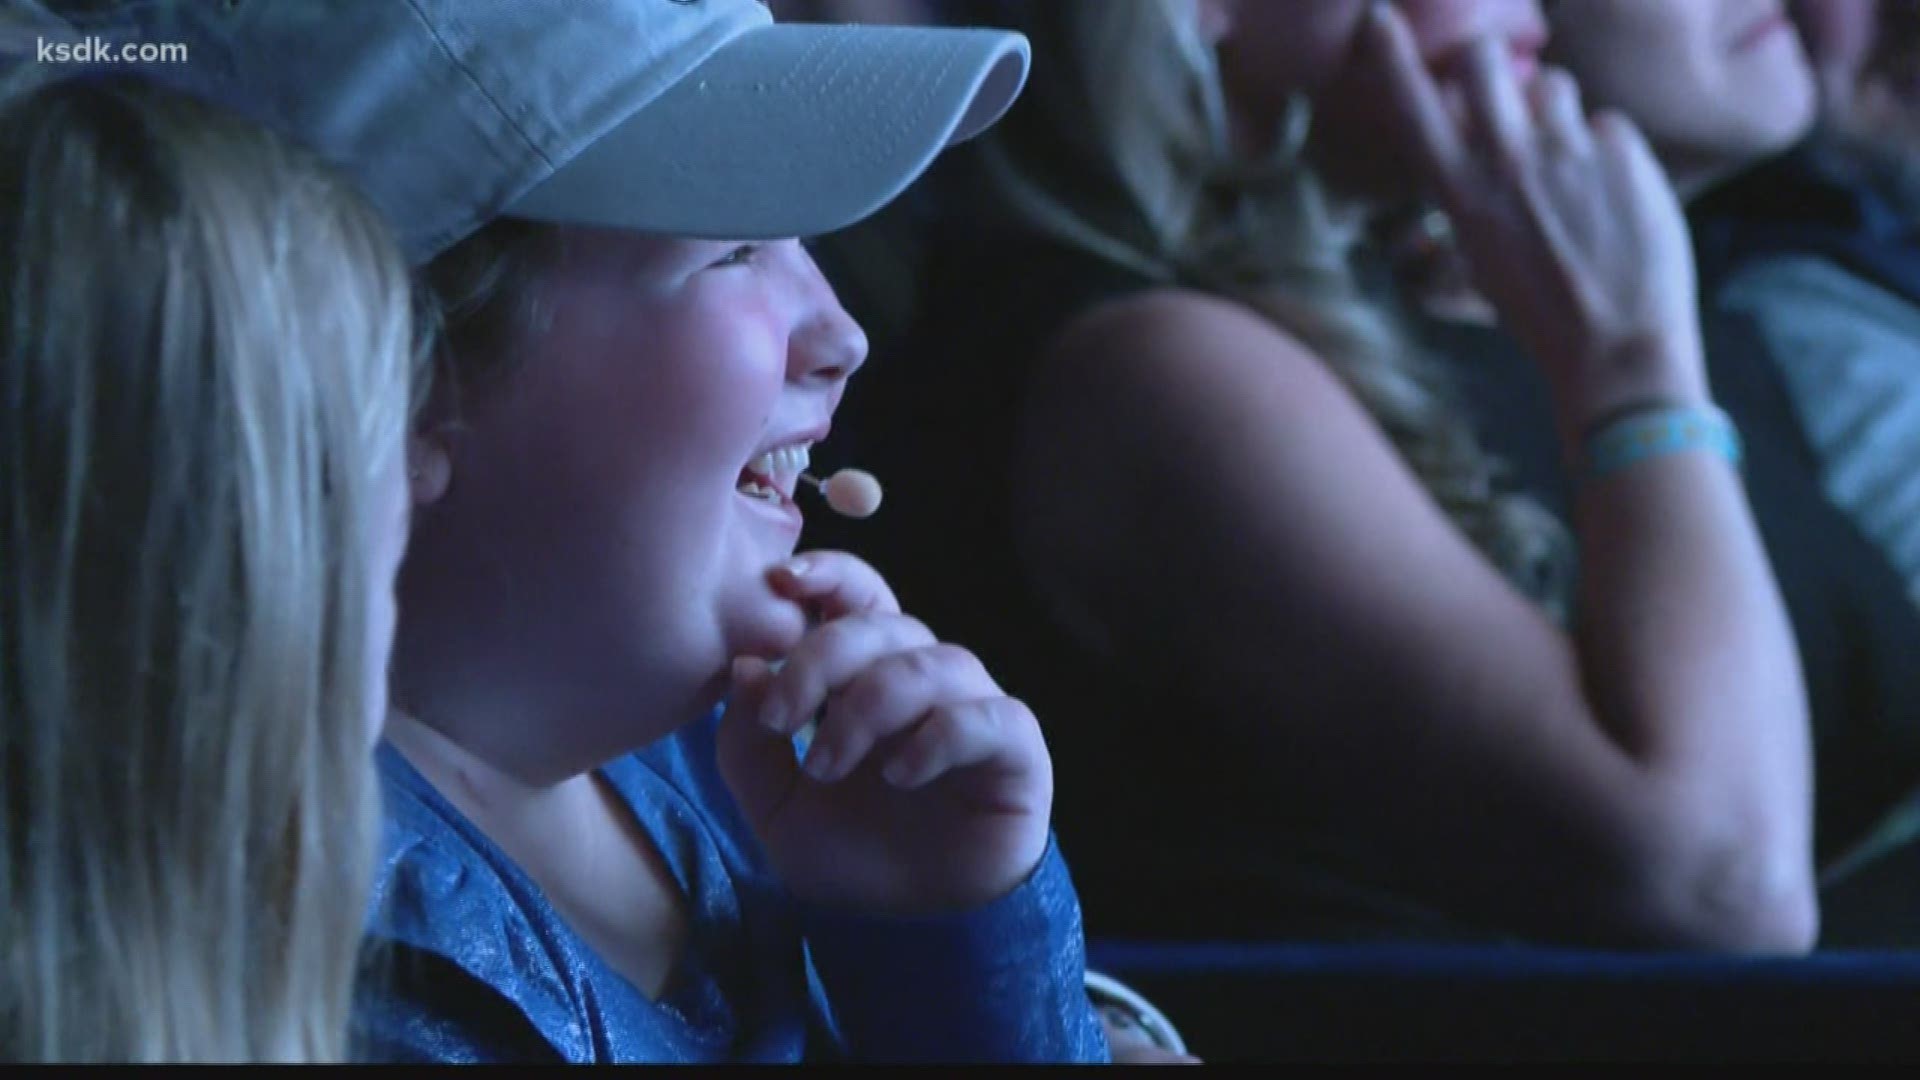 The Blues gave superfan Laila Anderson her own Stanley Cup championship ring